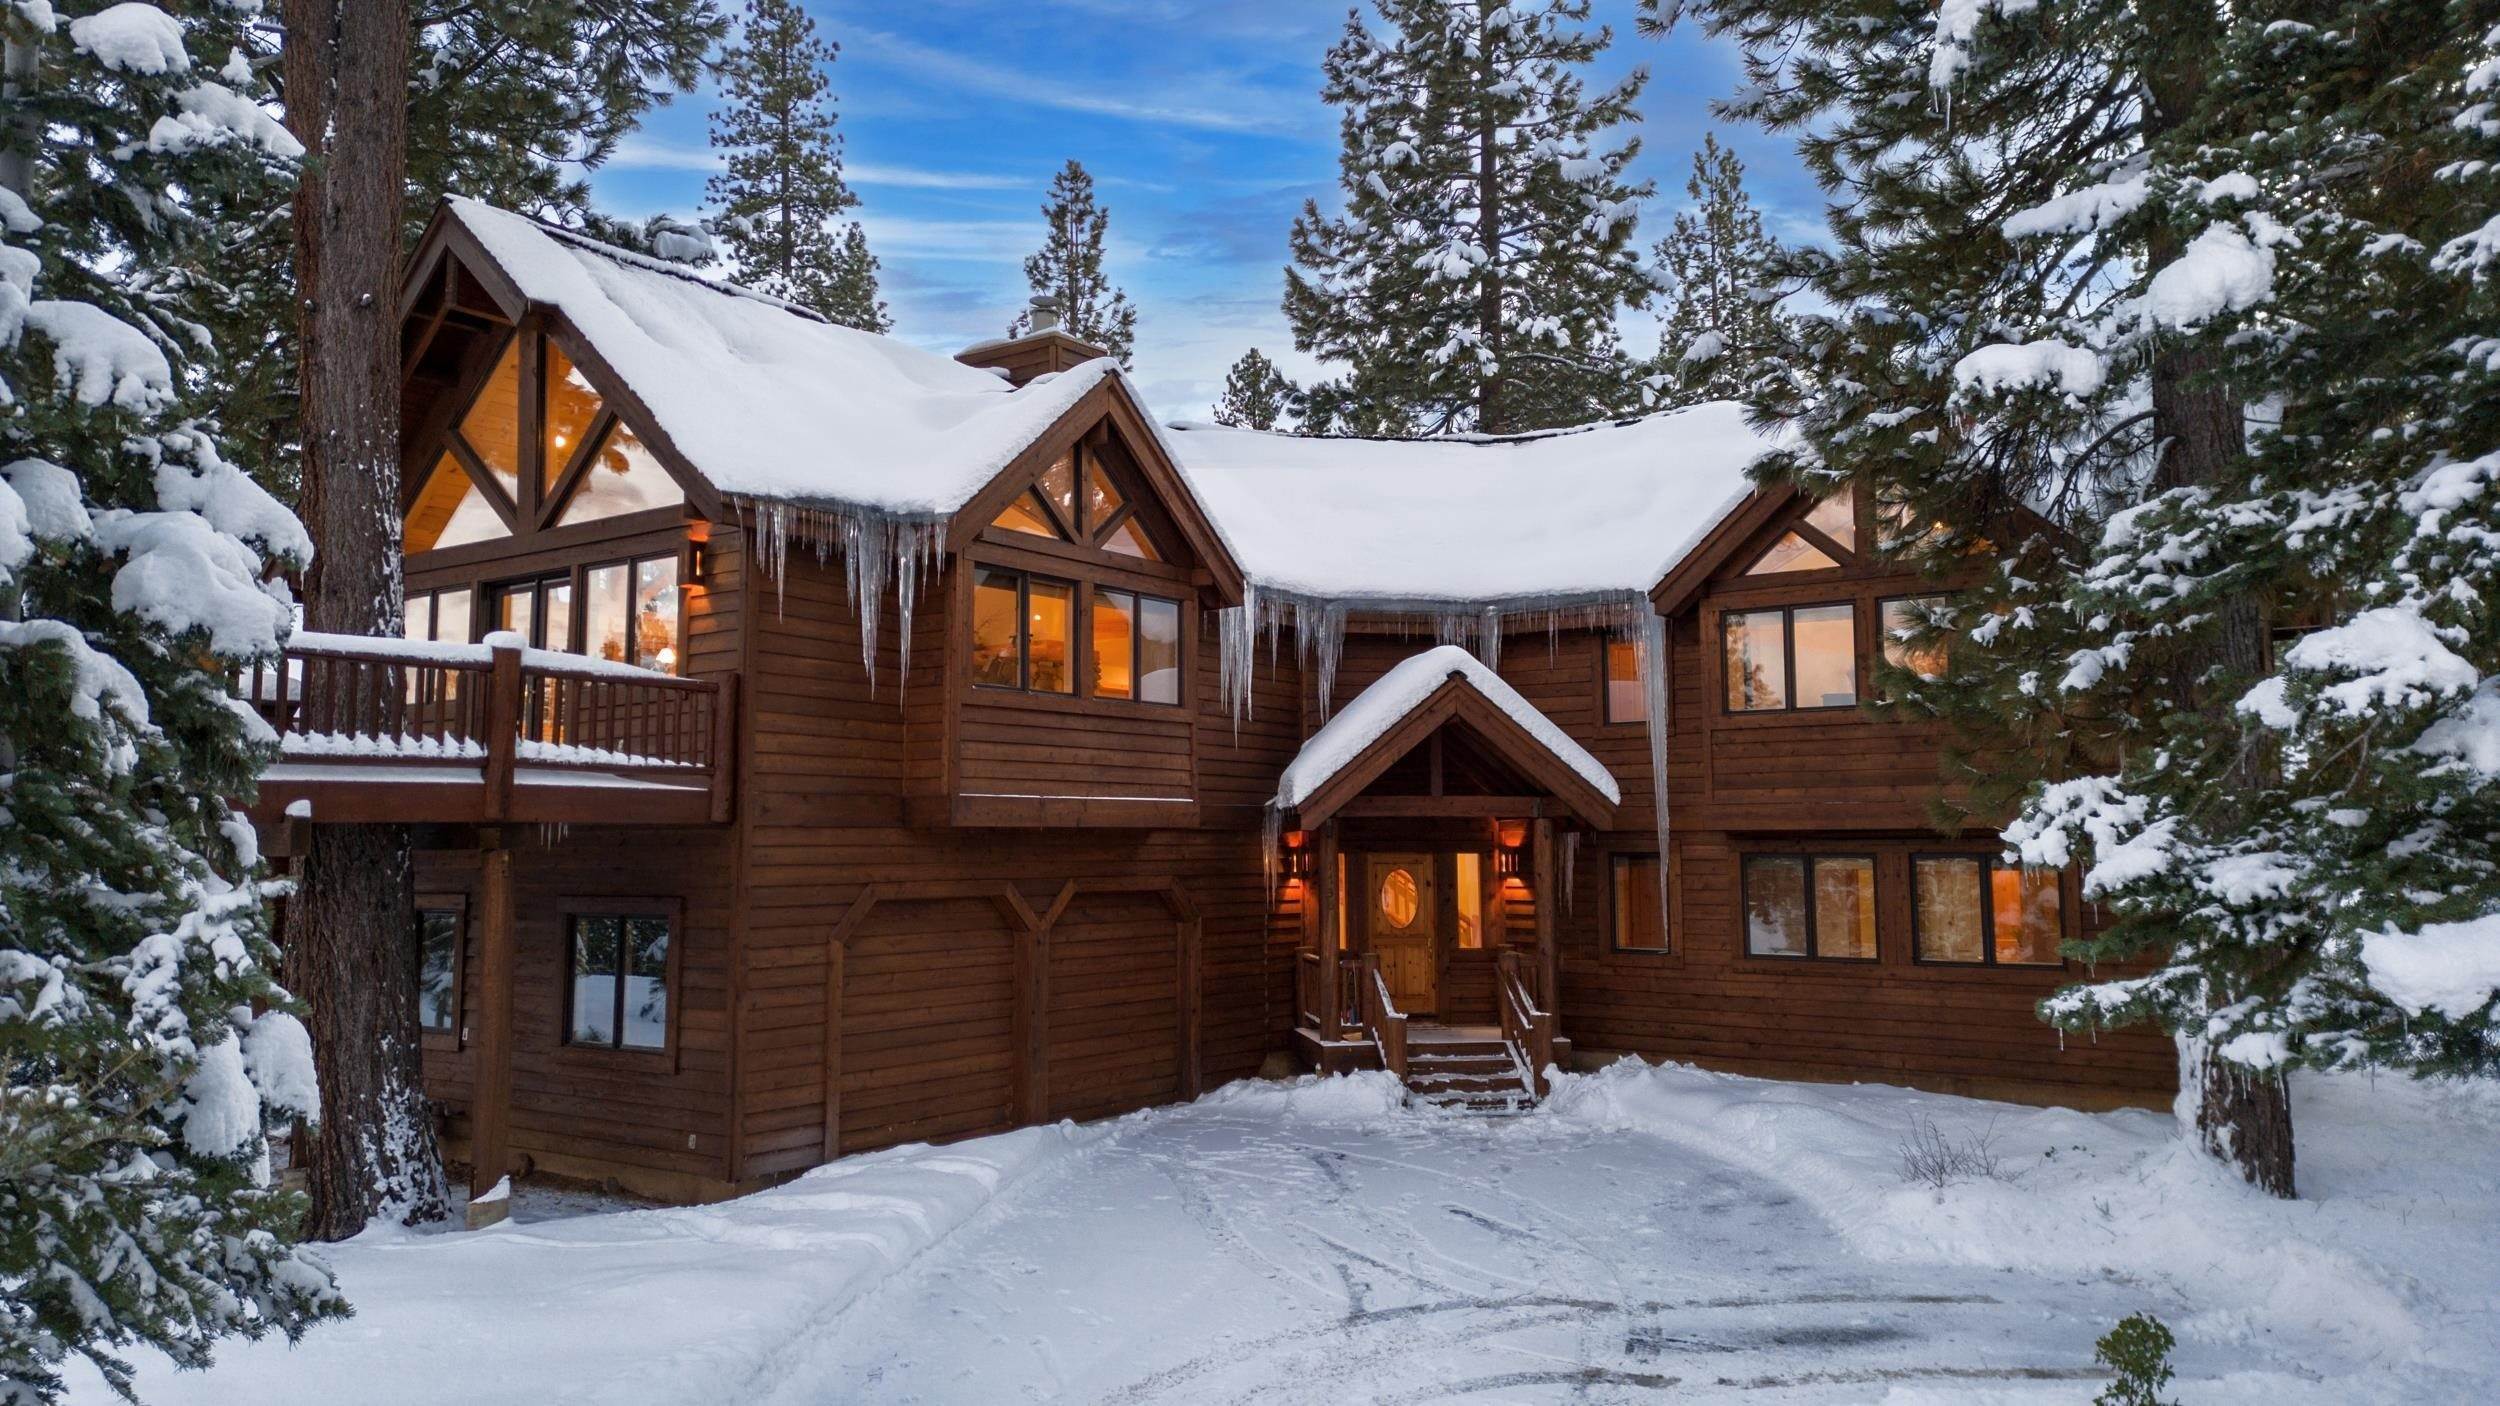 Single Family Homes for Active at 1730 Grouse Ridge Road Truckee, California 96161 United States